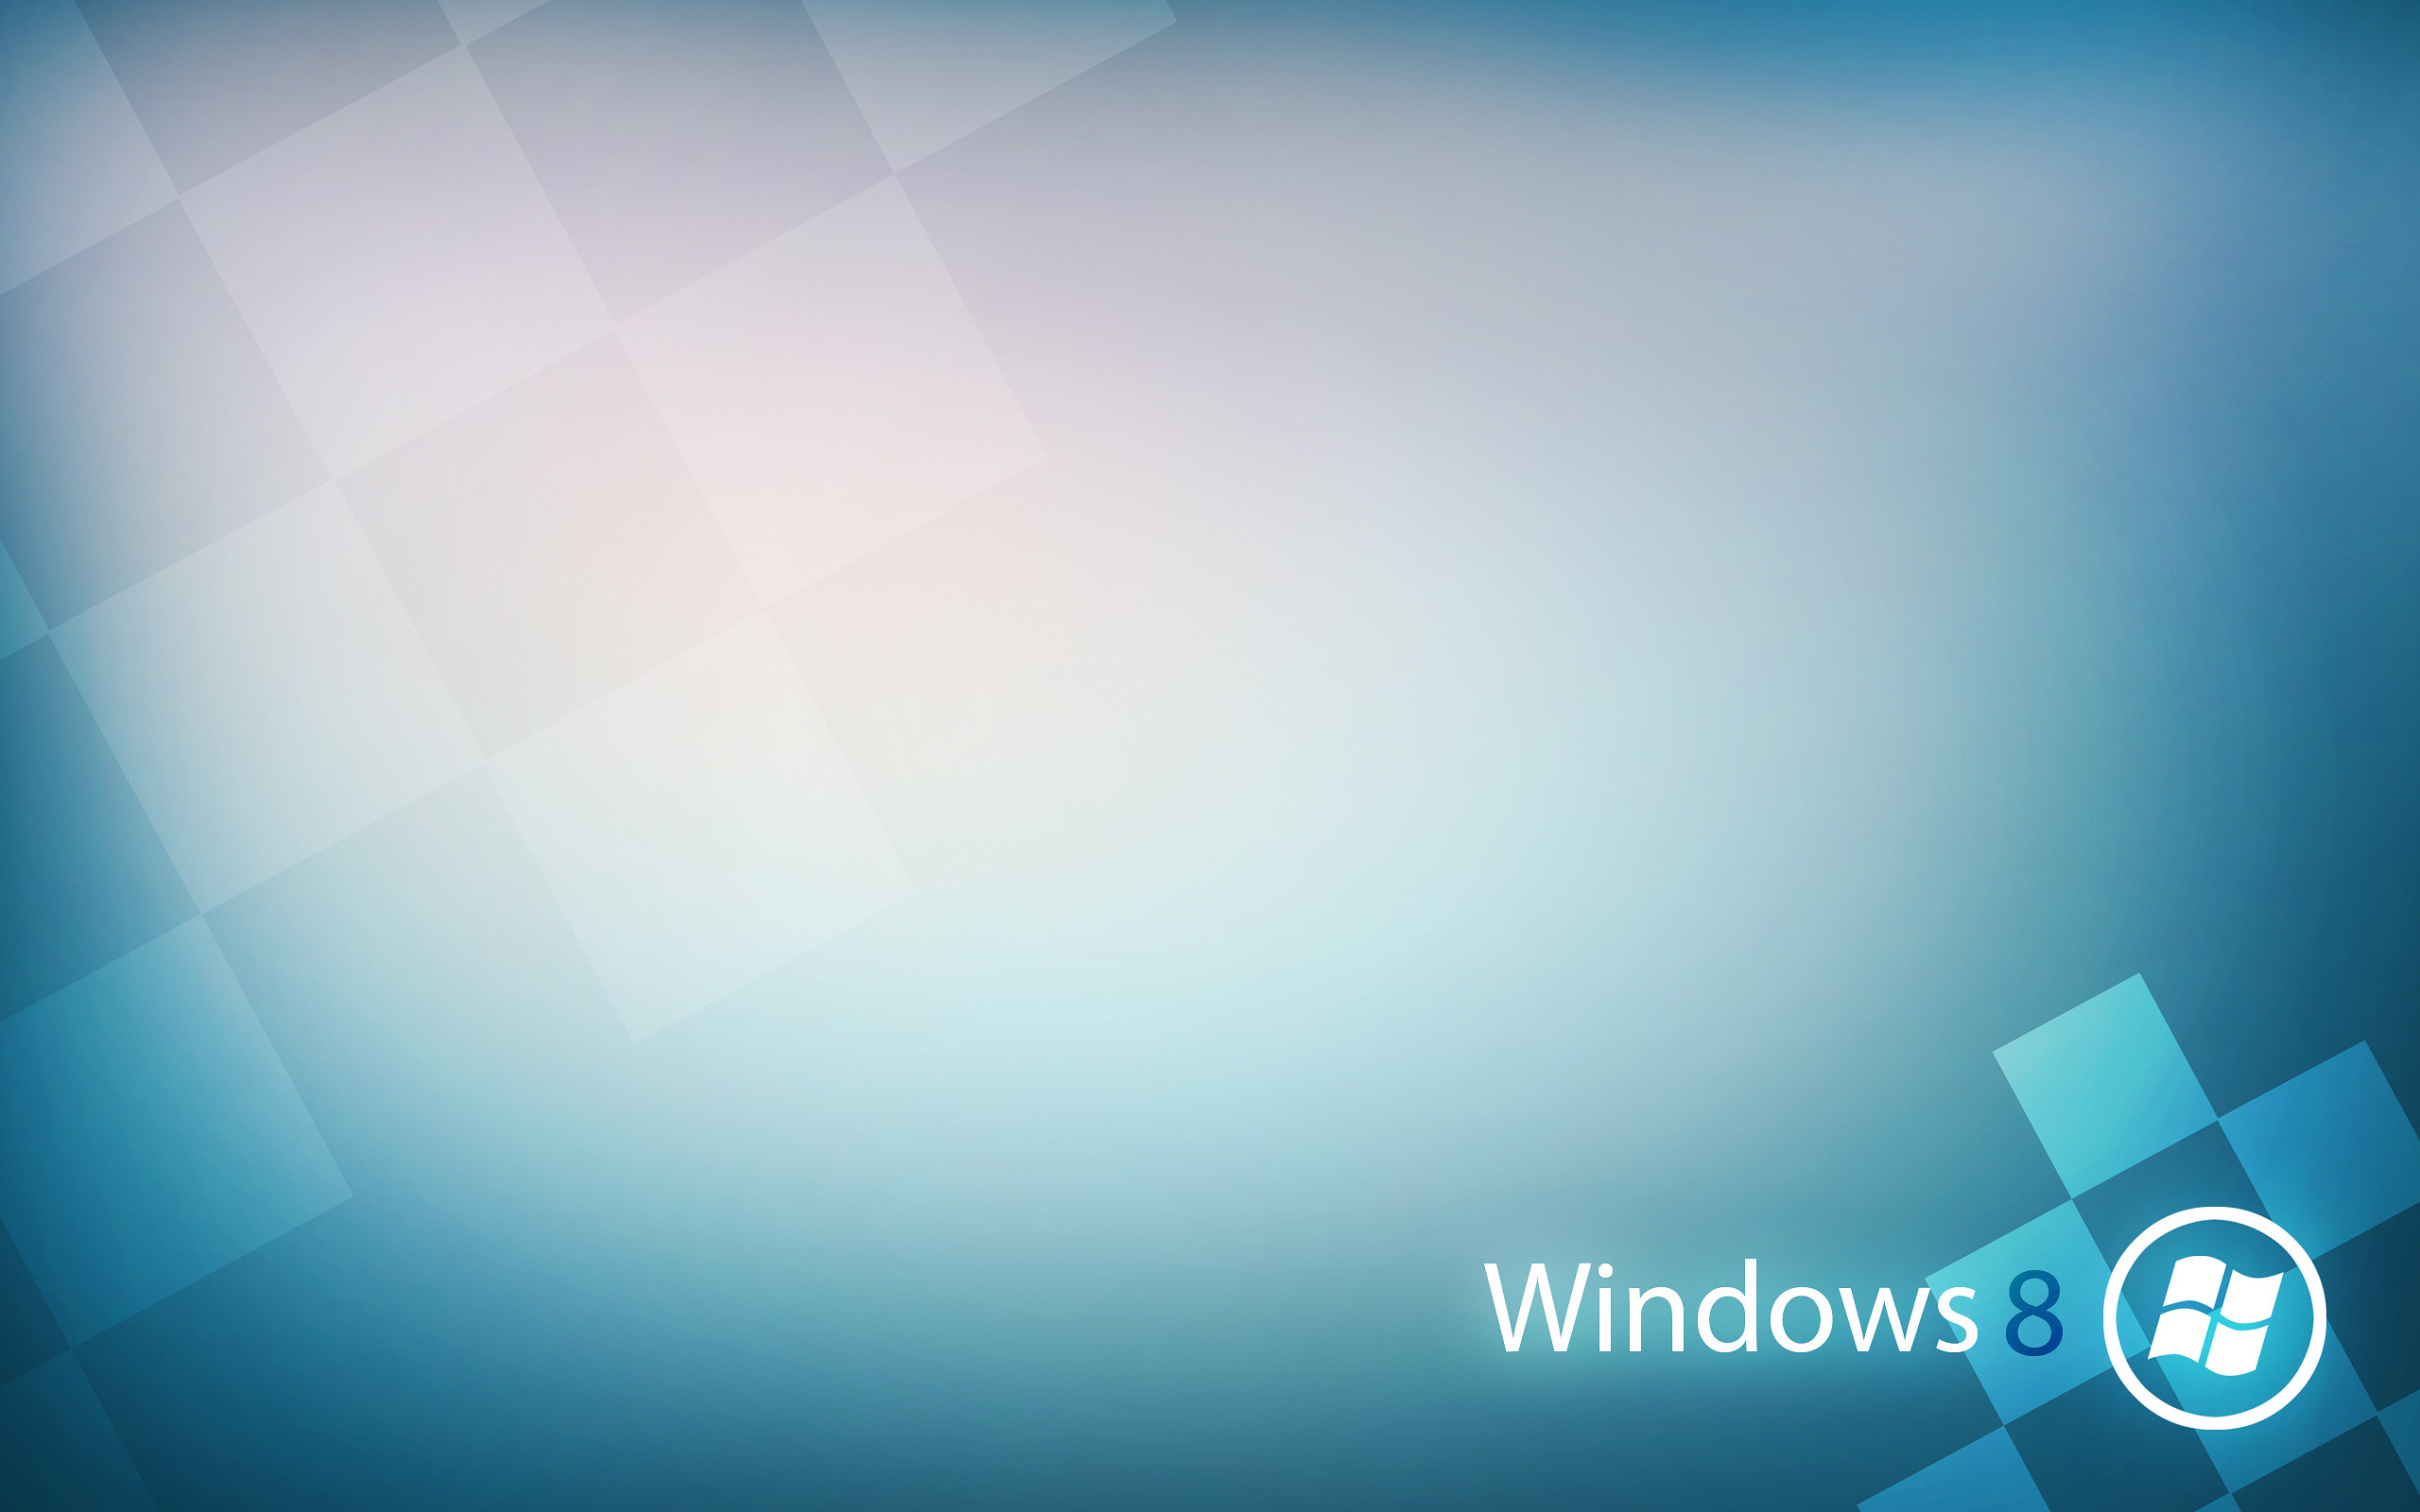 Windows 8 Official Wallpaper 81 Pictures